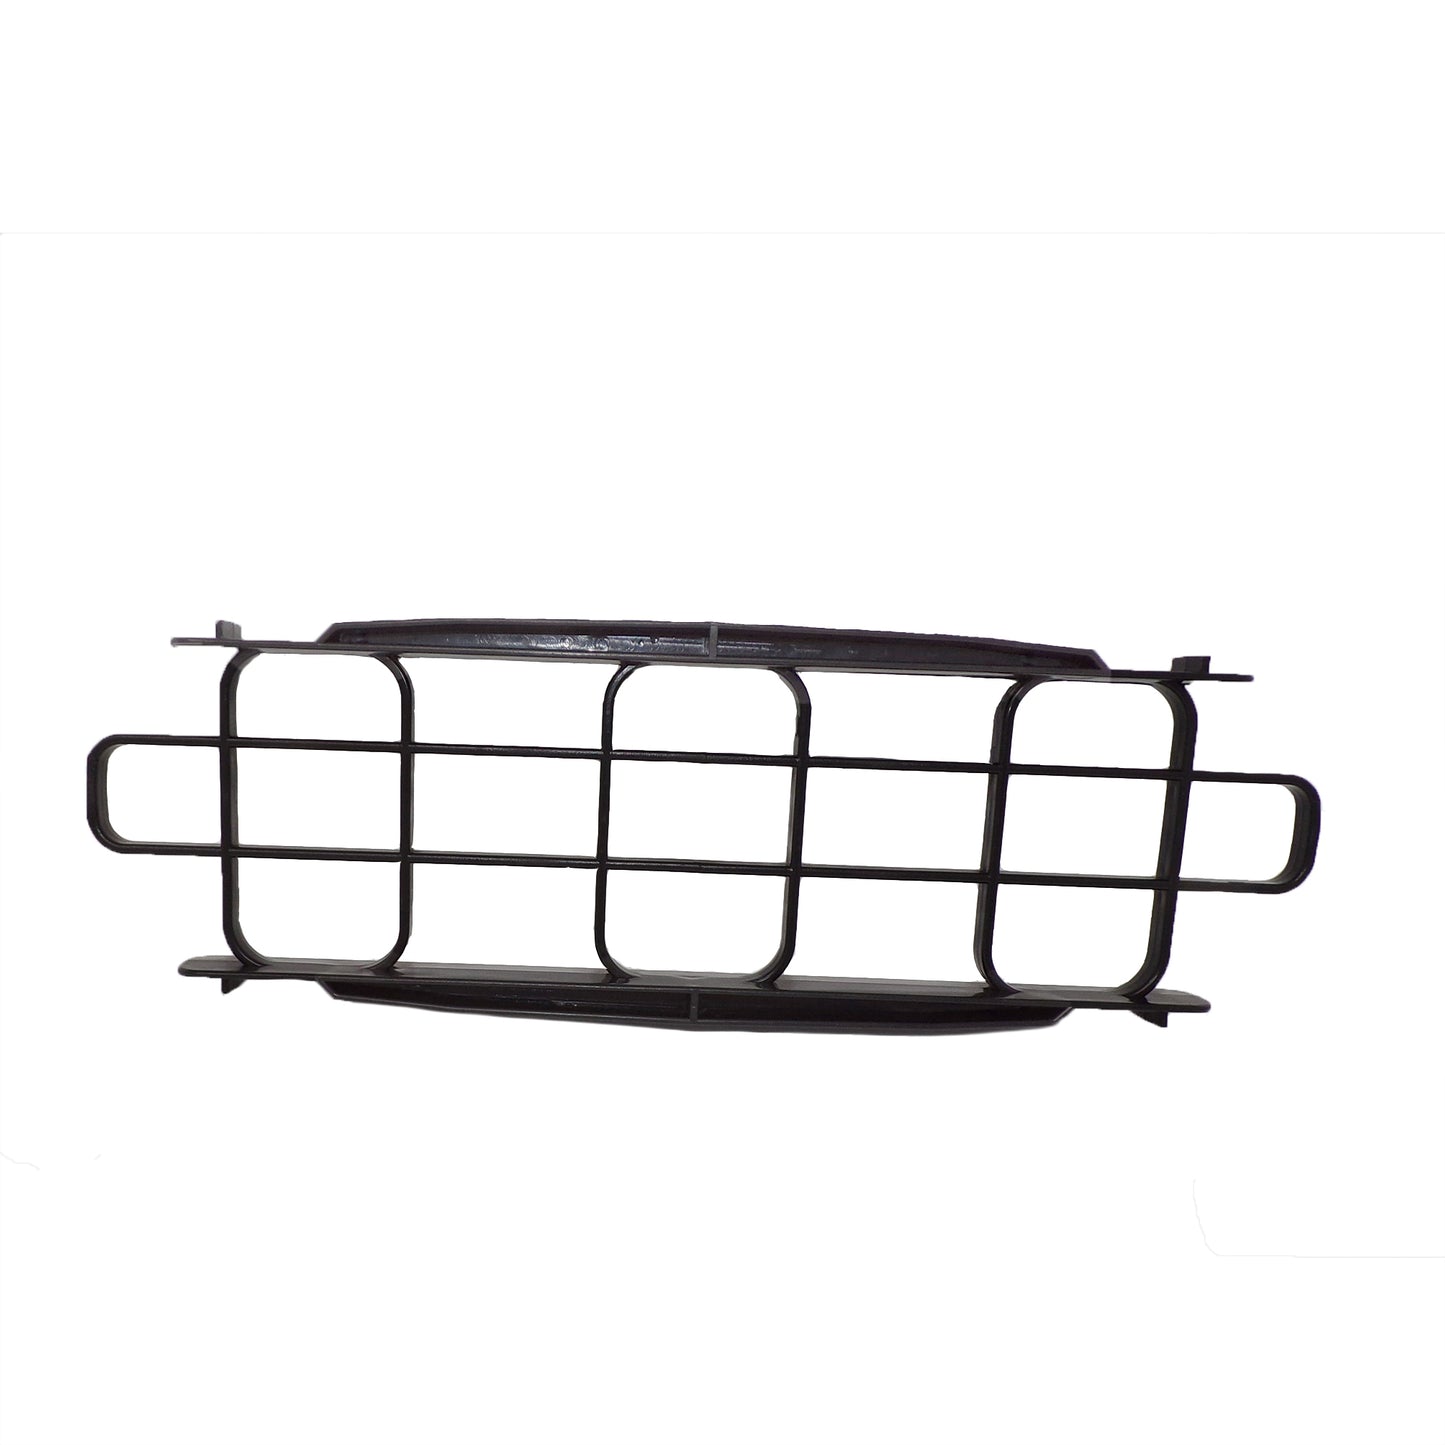 Air Outlet Grille Cover for X-600 Air Mover